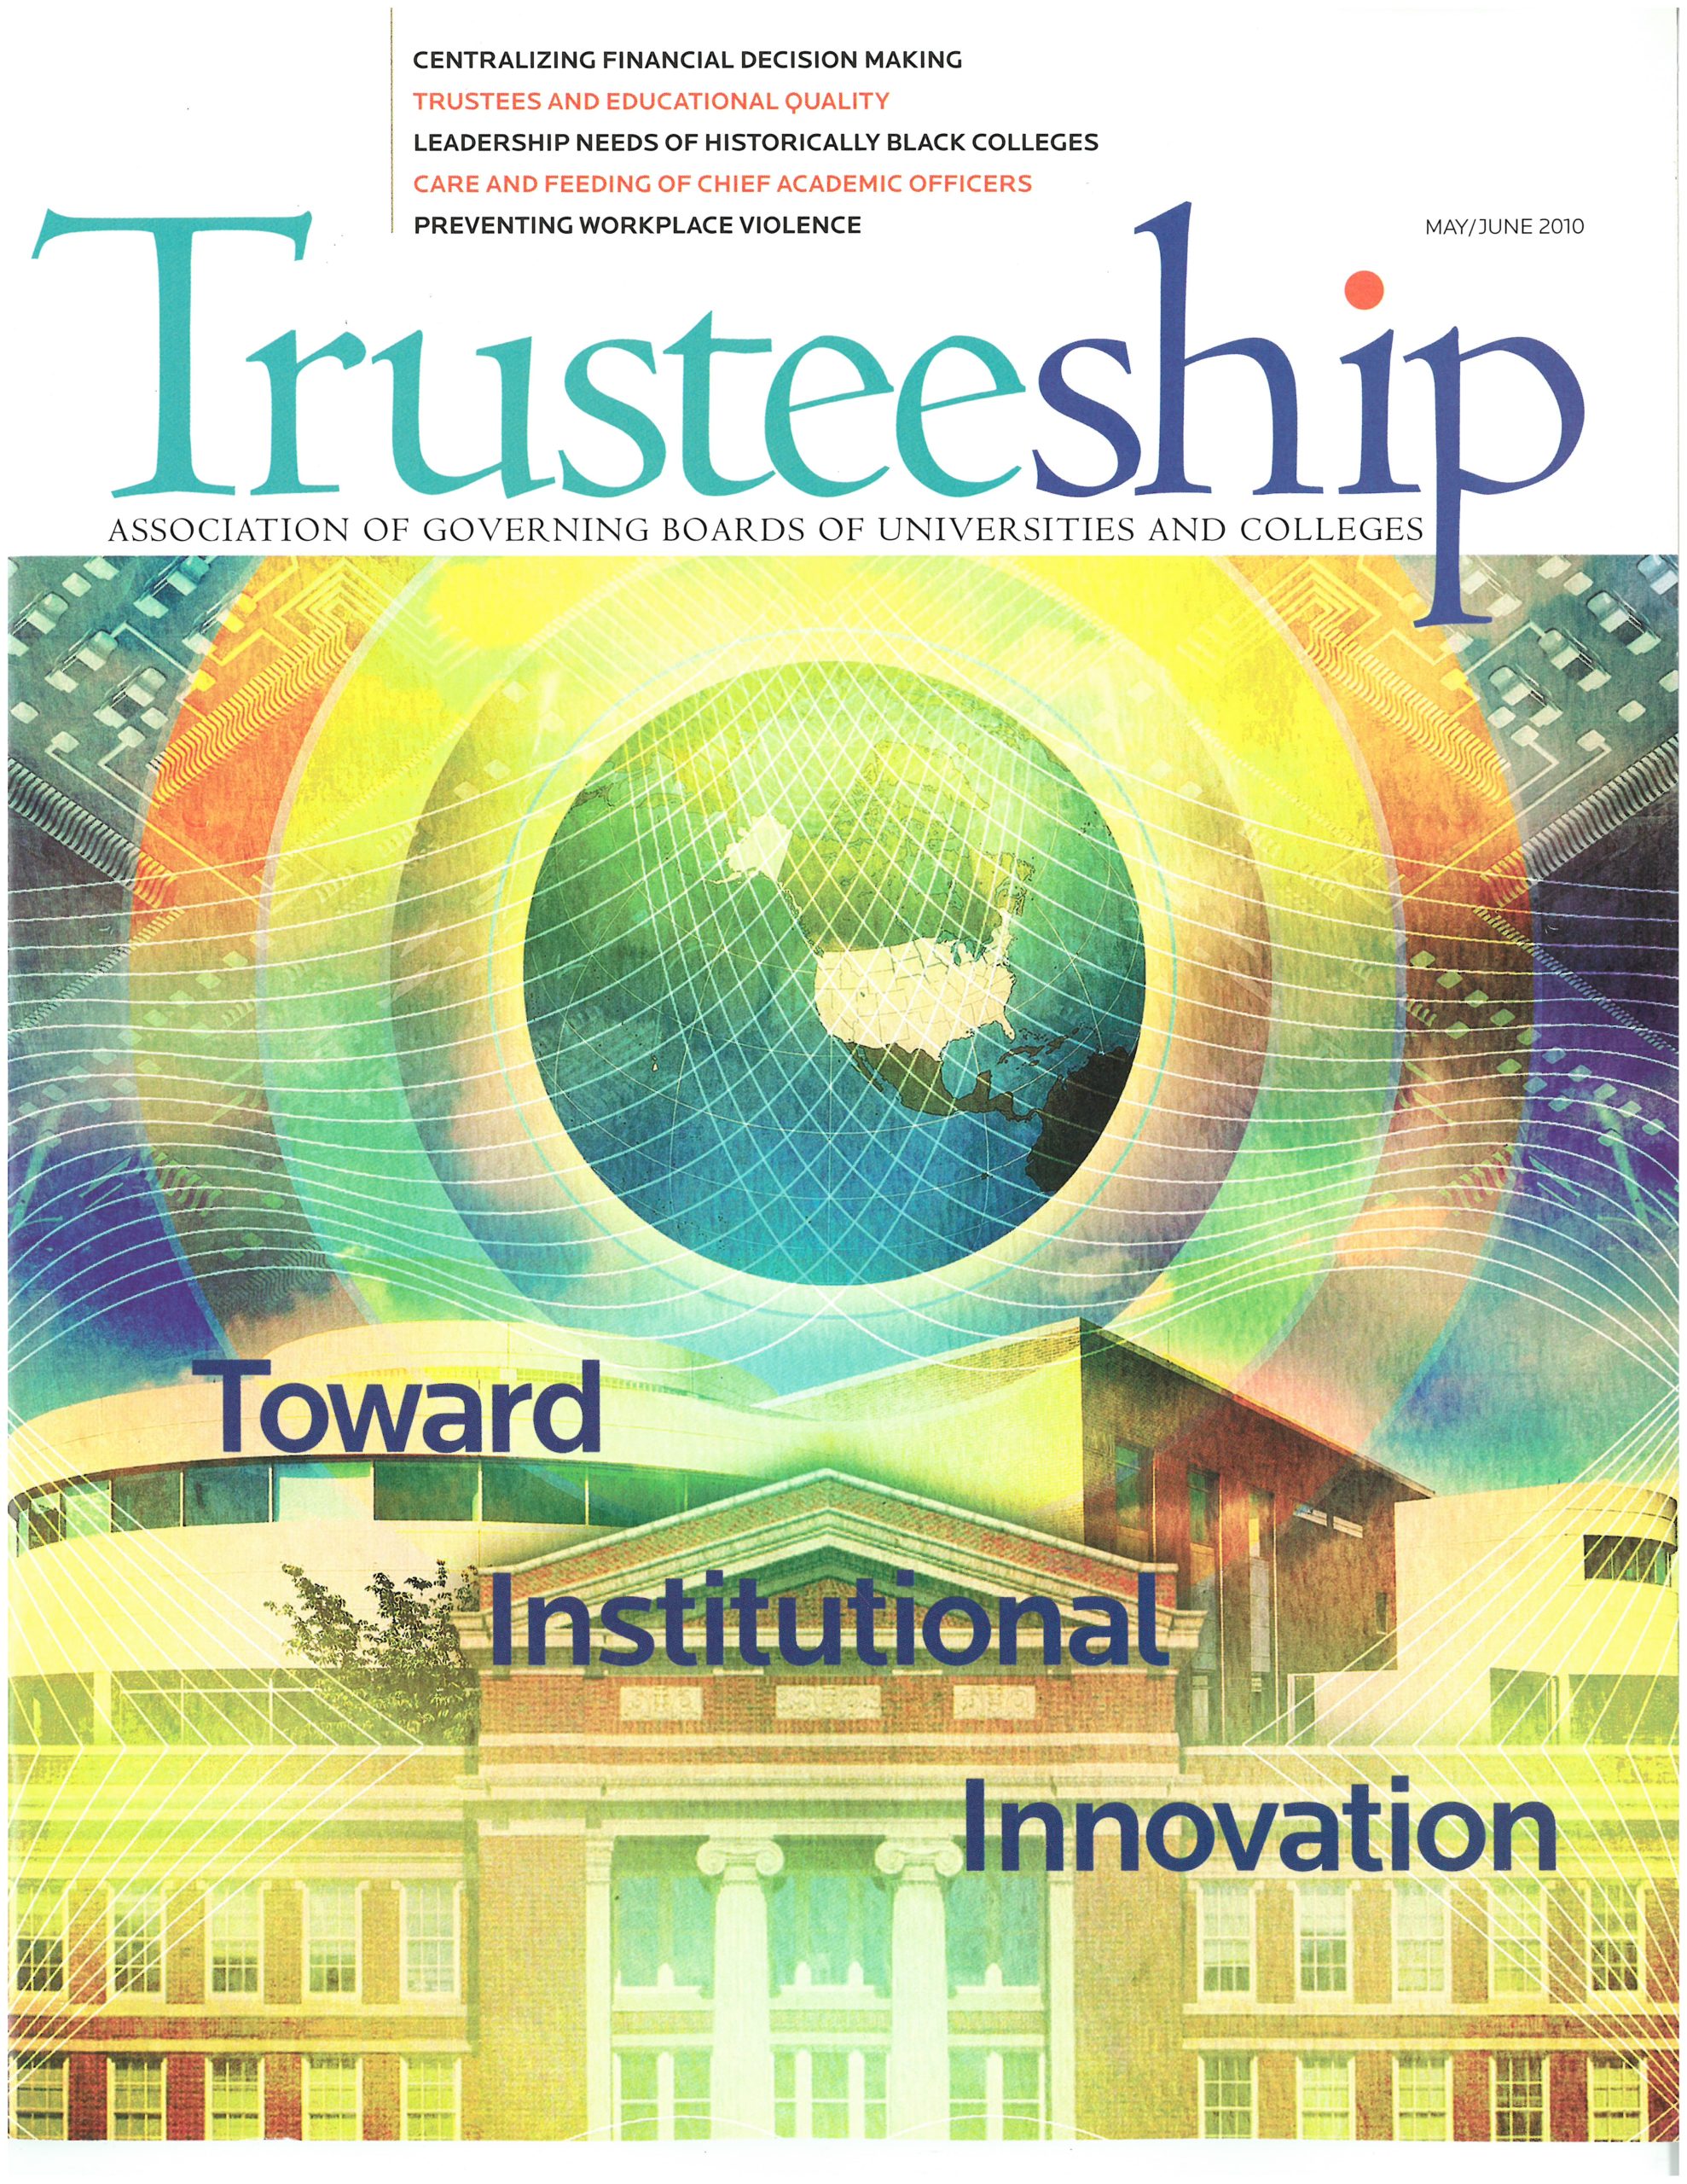 AGB Trusteeship Magazine May/June 2010 with cover article "Toward Institutional Innovation"